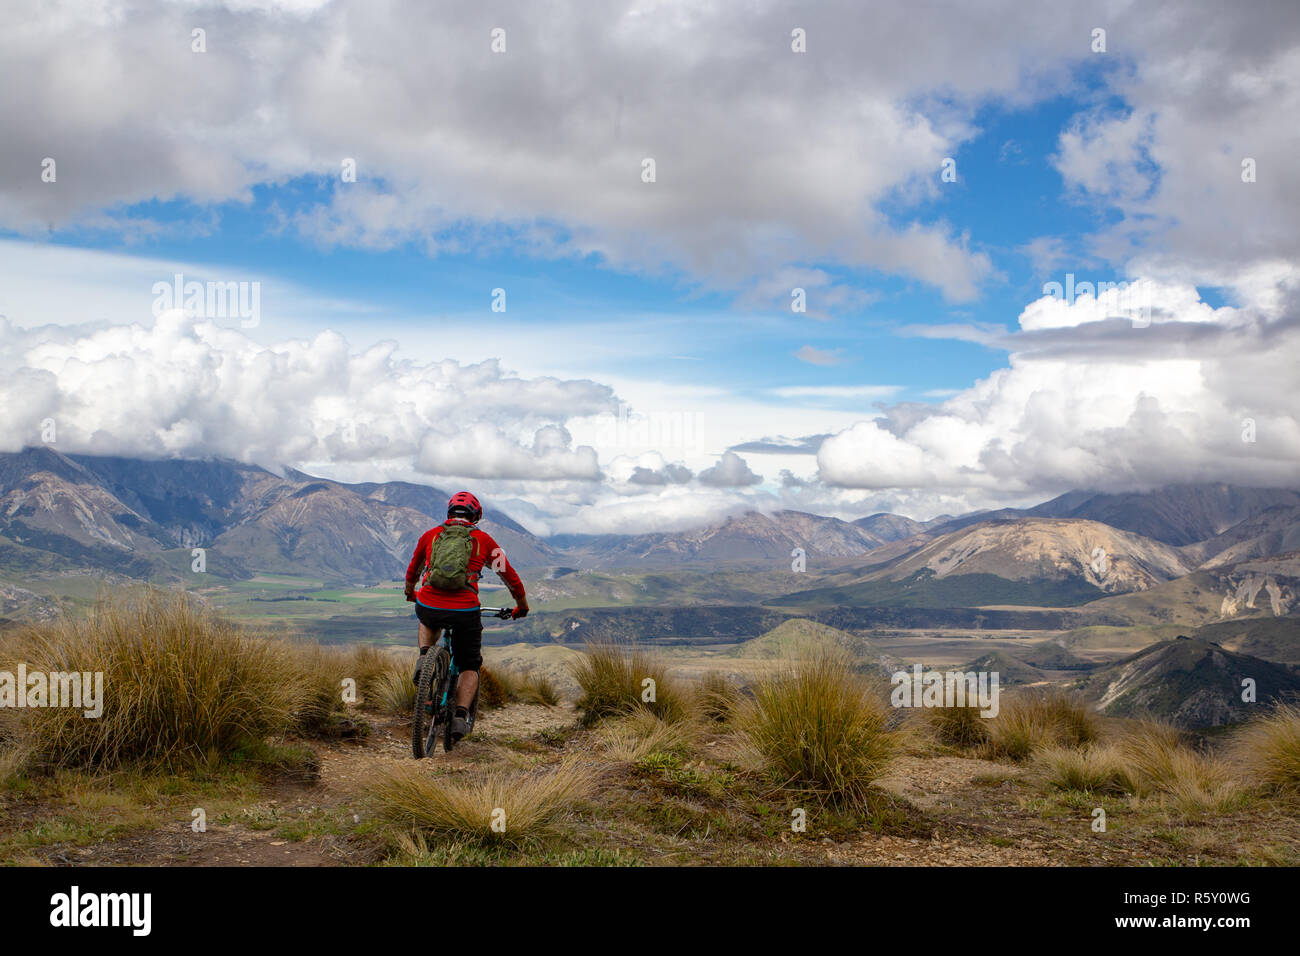 A mountain biker rides along the ridge and descends the mountain with beautiful scenery way down below Stock Photo